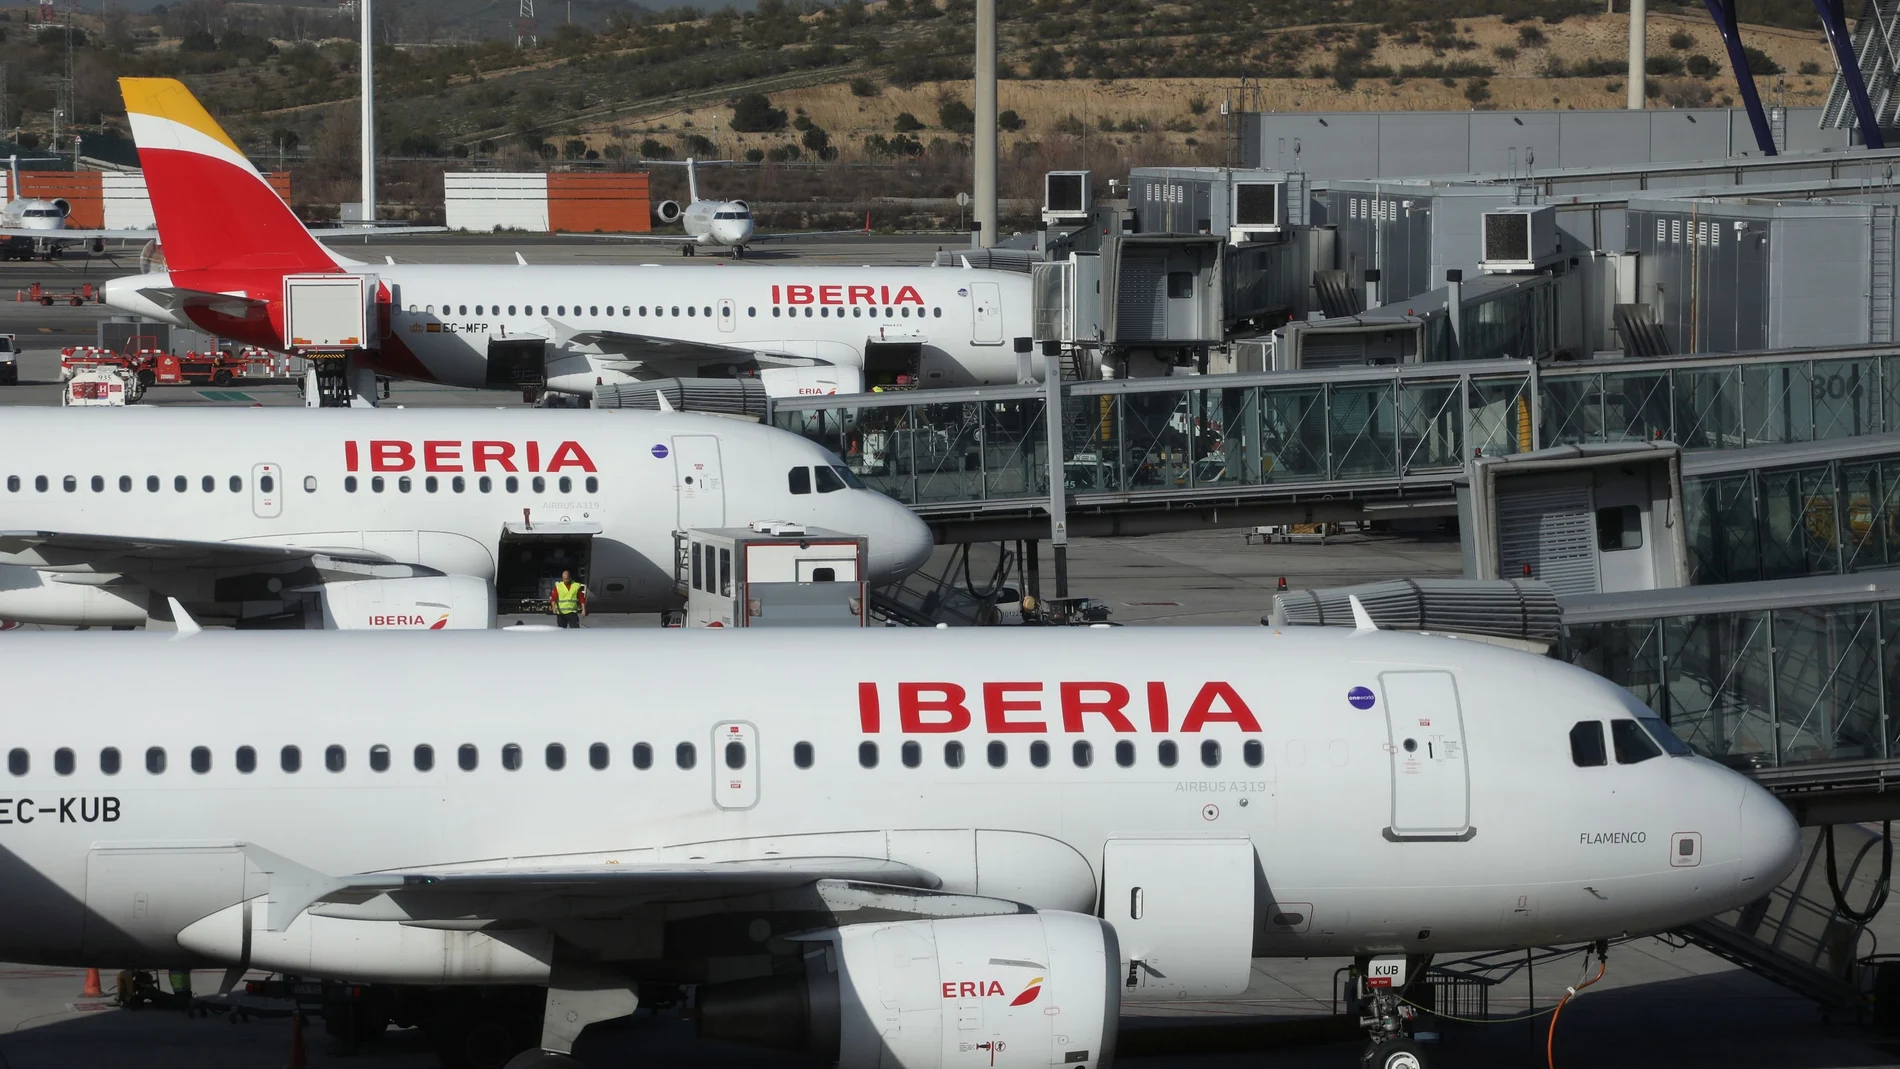 Planes stand on the tarmac of Madrid's Barajas airport, in Madrid